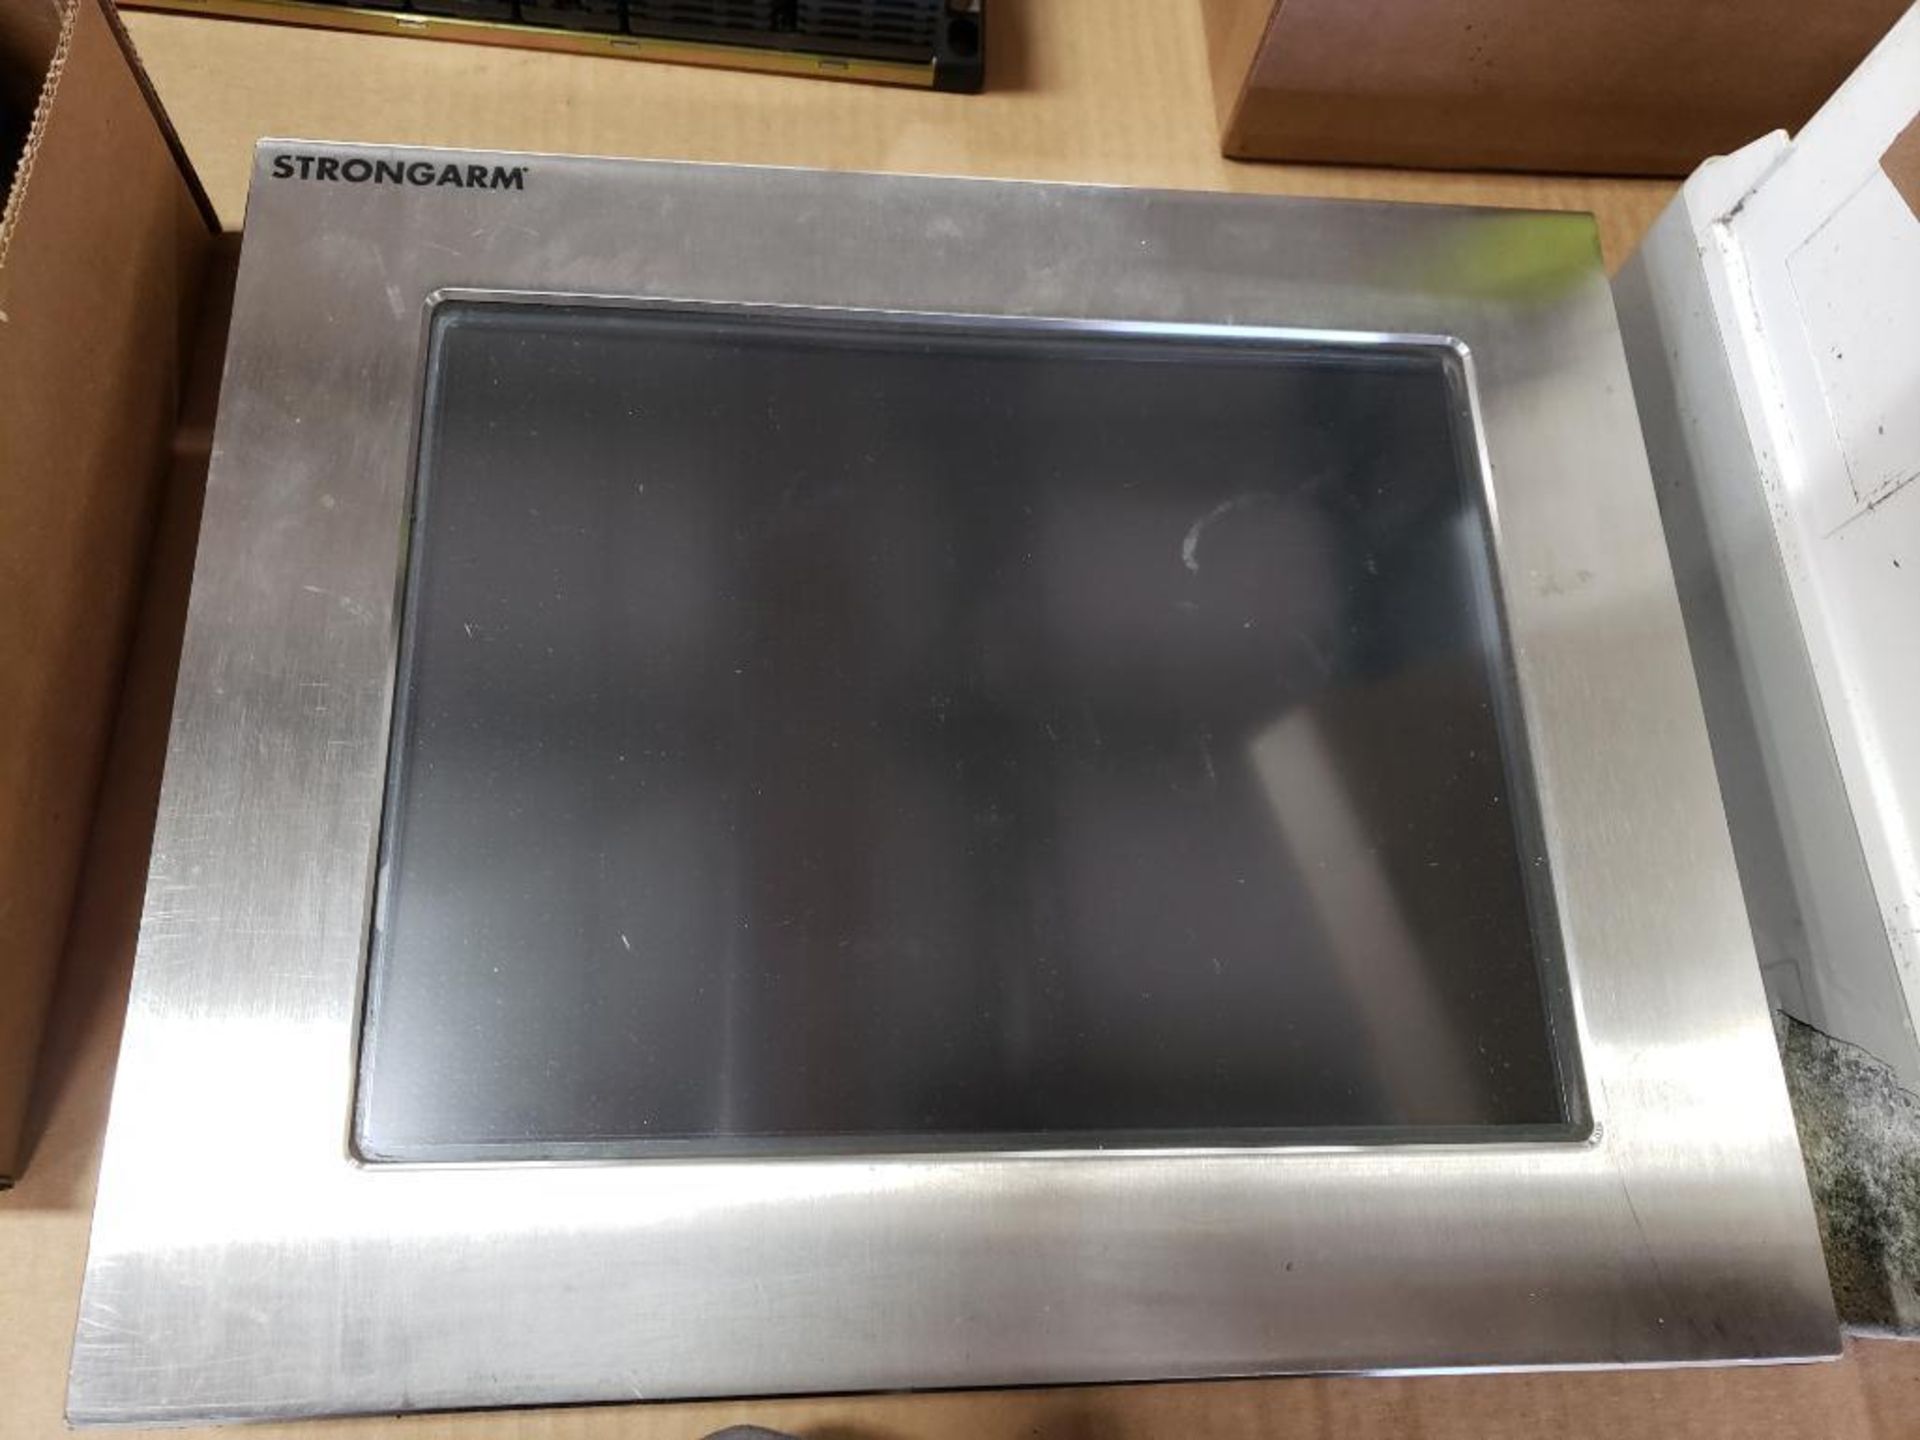 Strongarm 404-151T00 Stainless Steel 15.1" Touchscreen display.